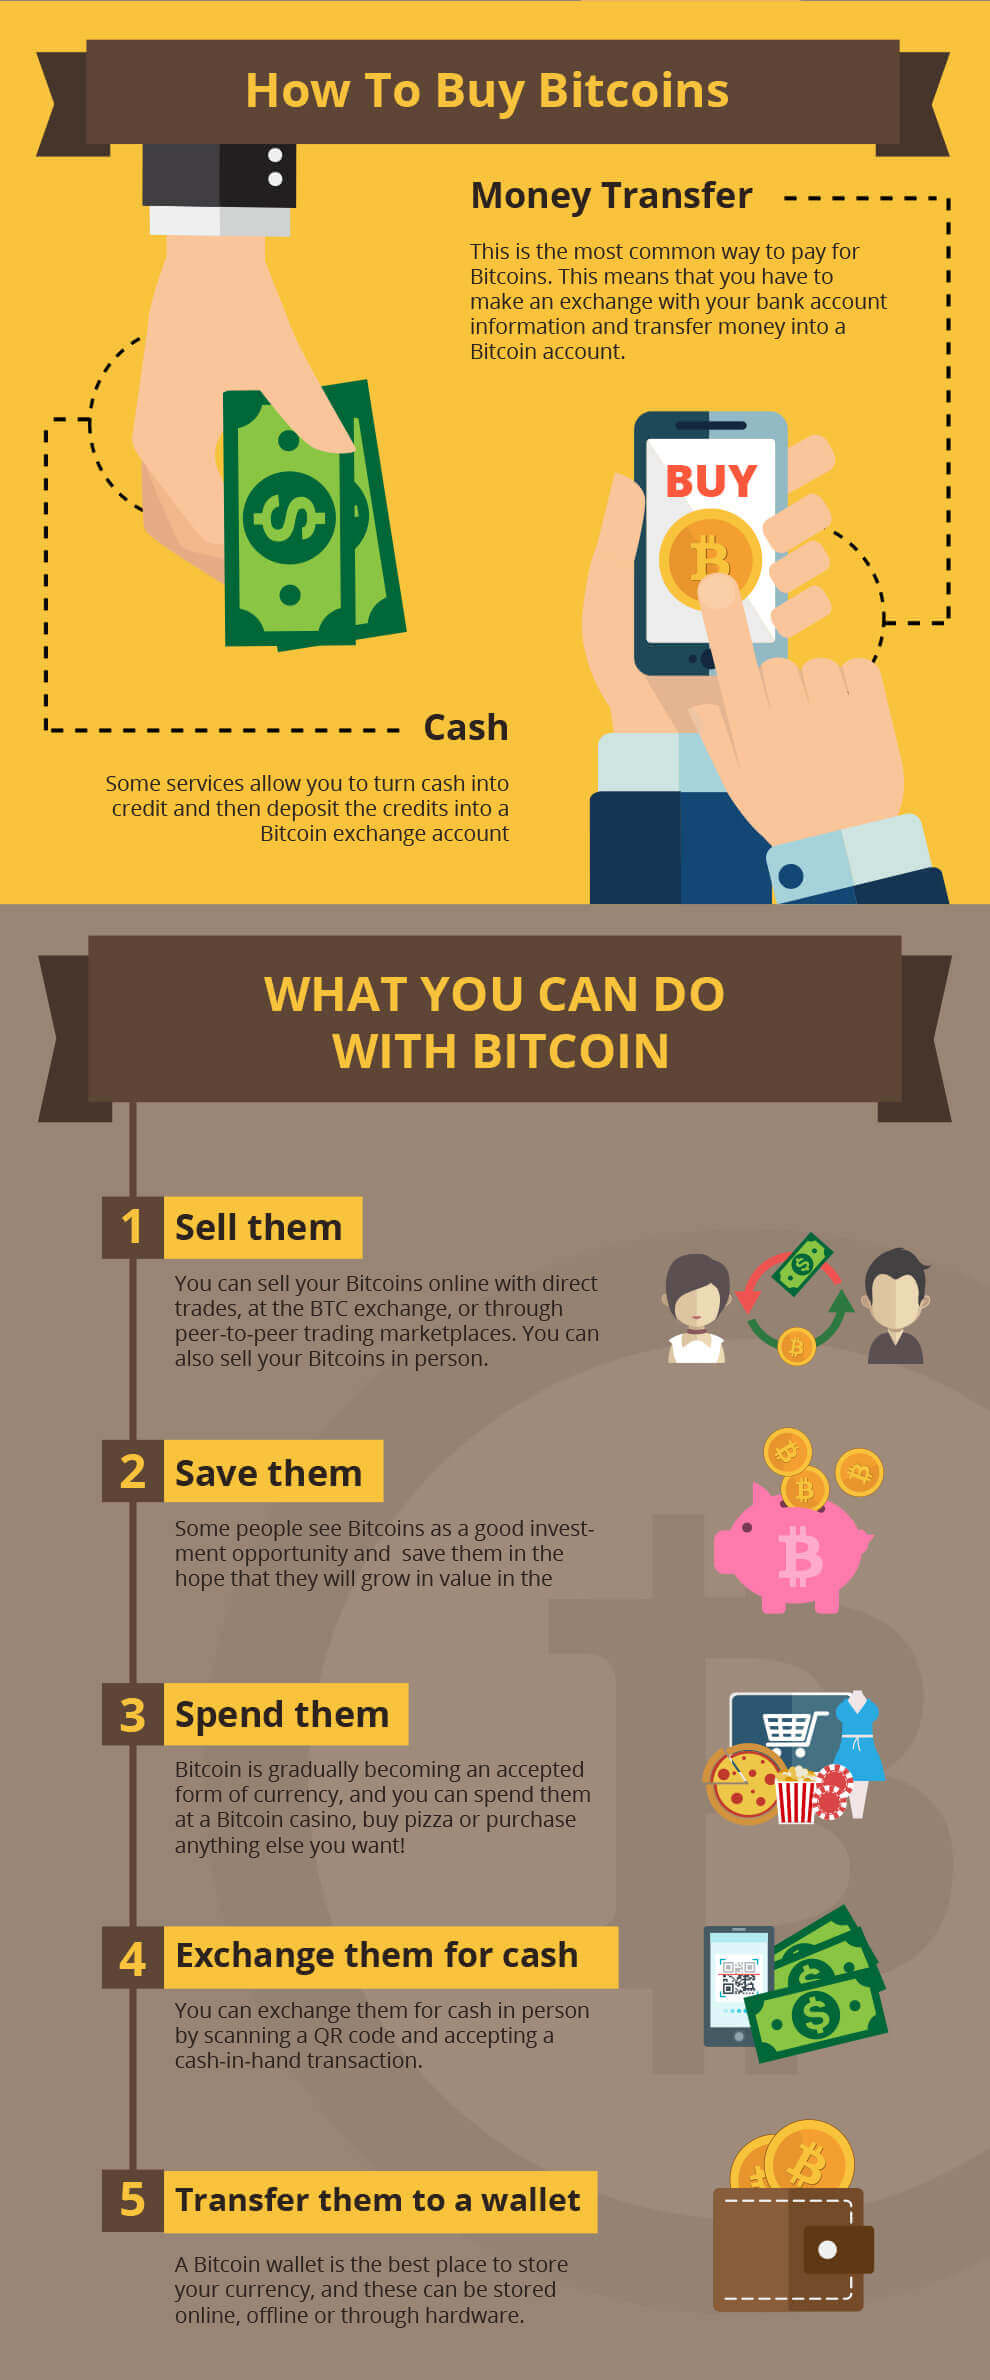 what can i do with bitcoins